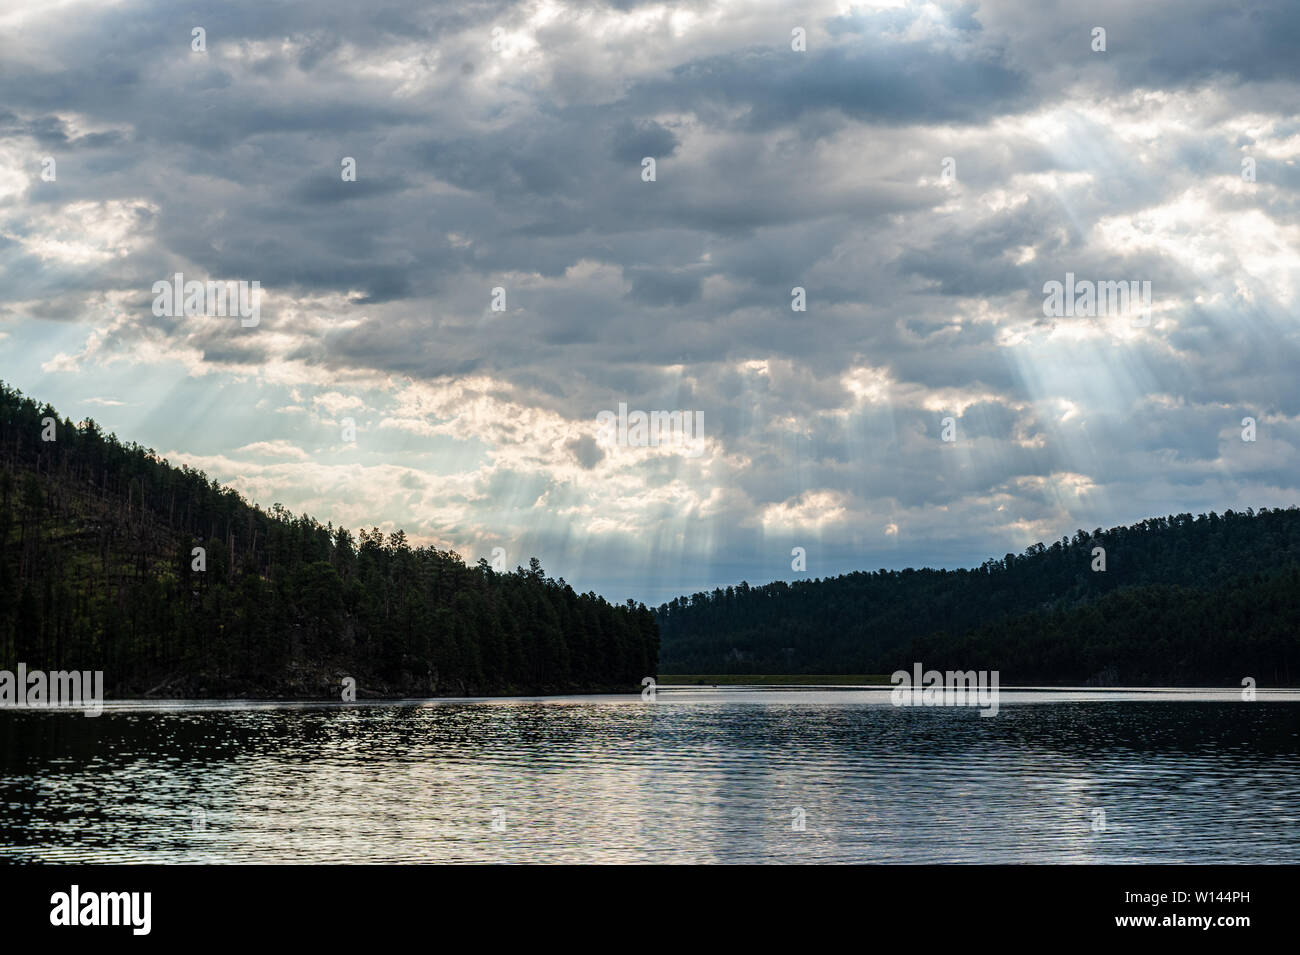 Sheridan Lake, in South Dakota's Black Hills, early in the Morning, after a thunder storm had passed over the area. Stock Photo